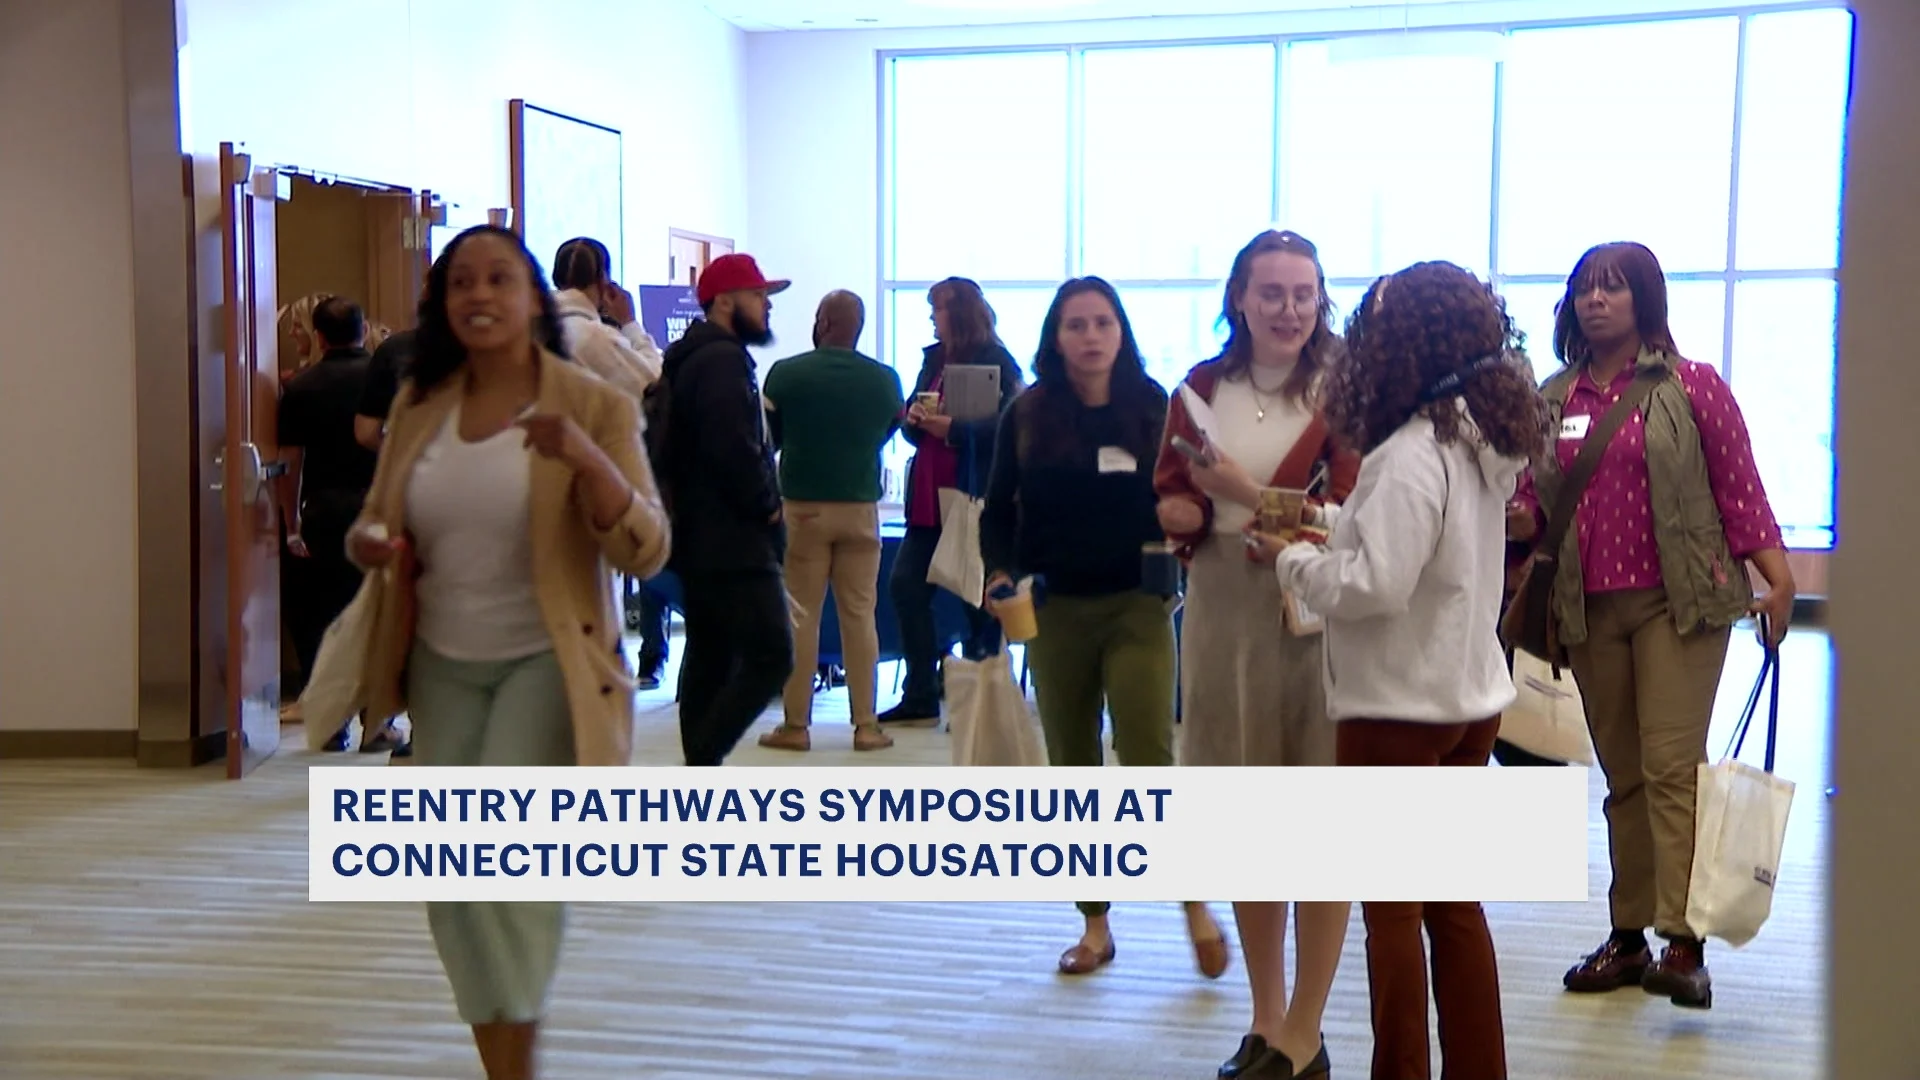 Community college in Bridgeport hosts symposium to assist people impacted by criminal justice system